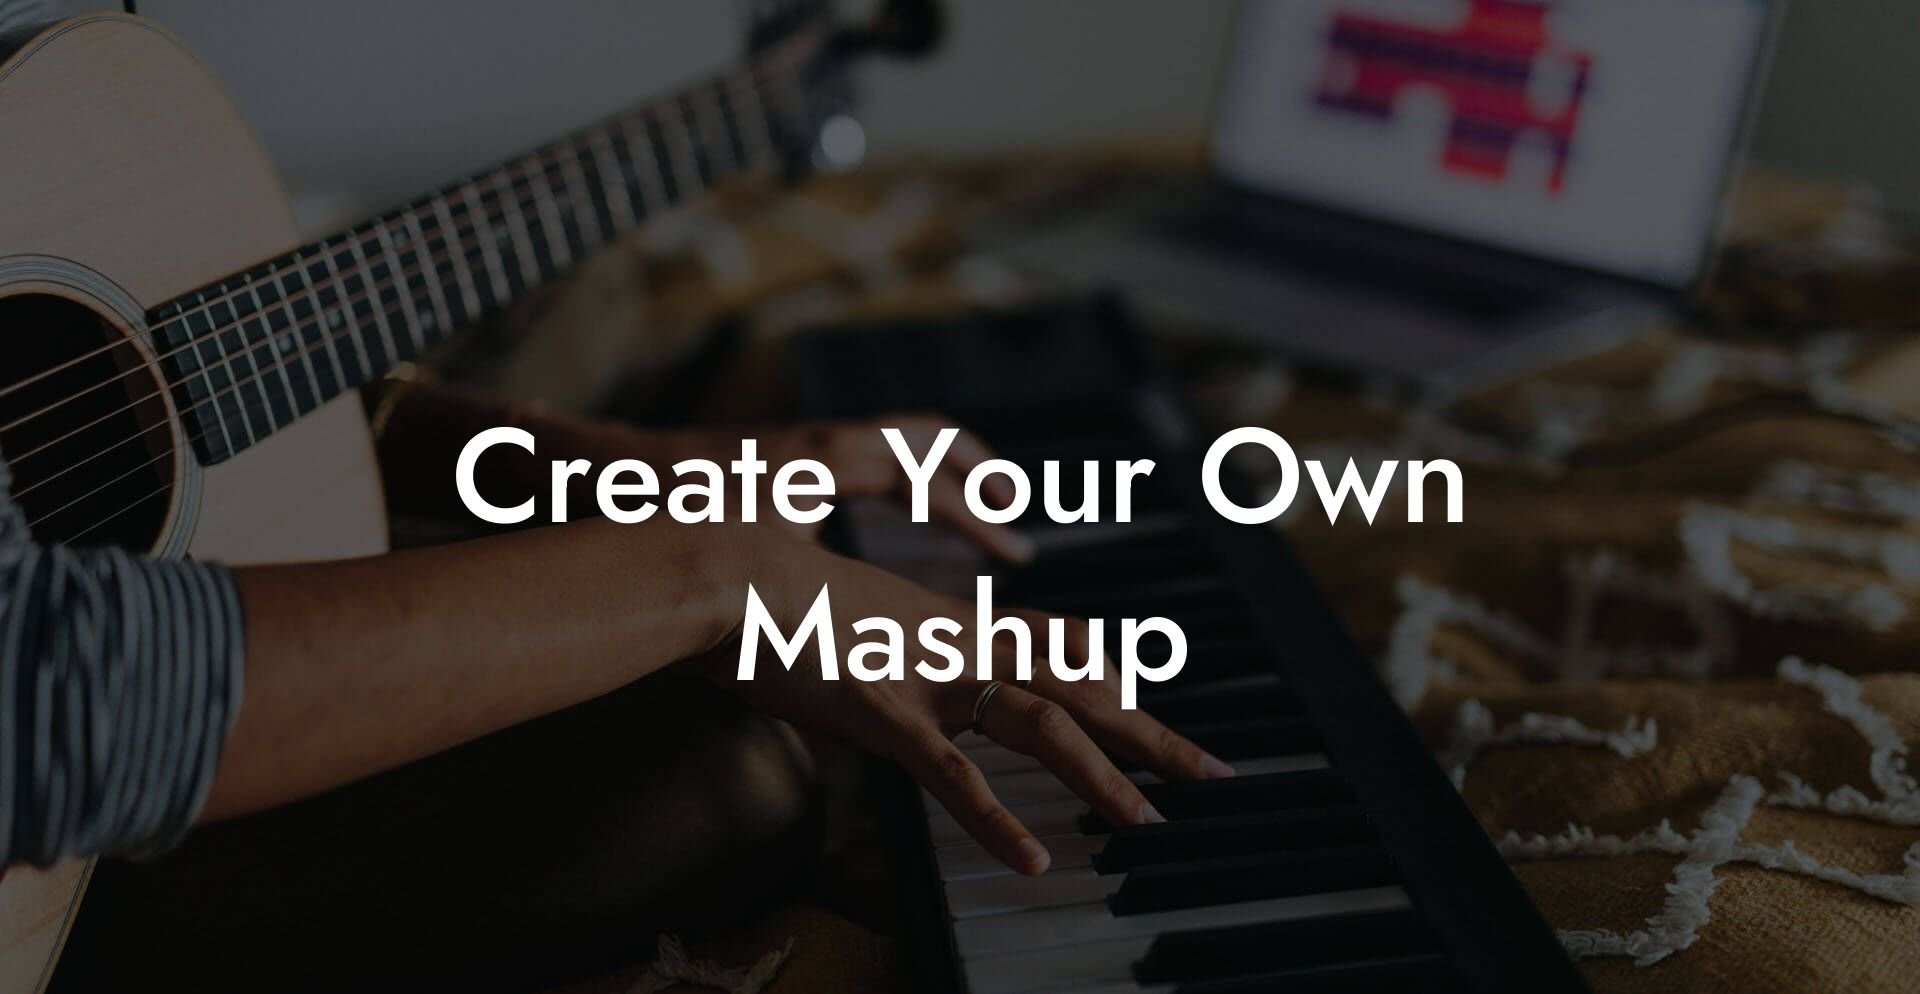 create your own mashup lyric assistant